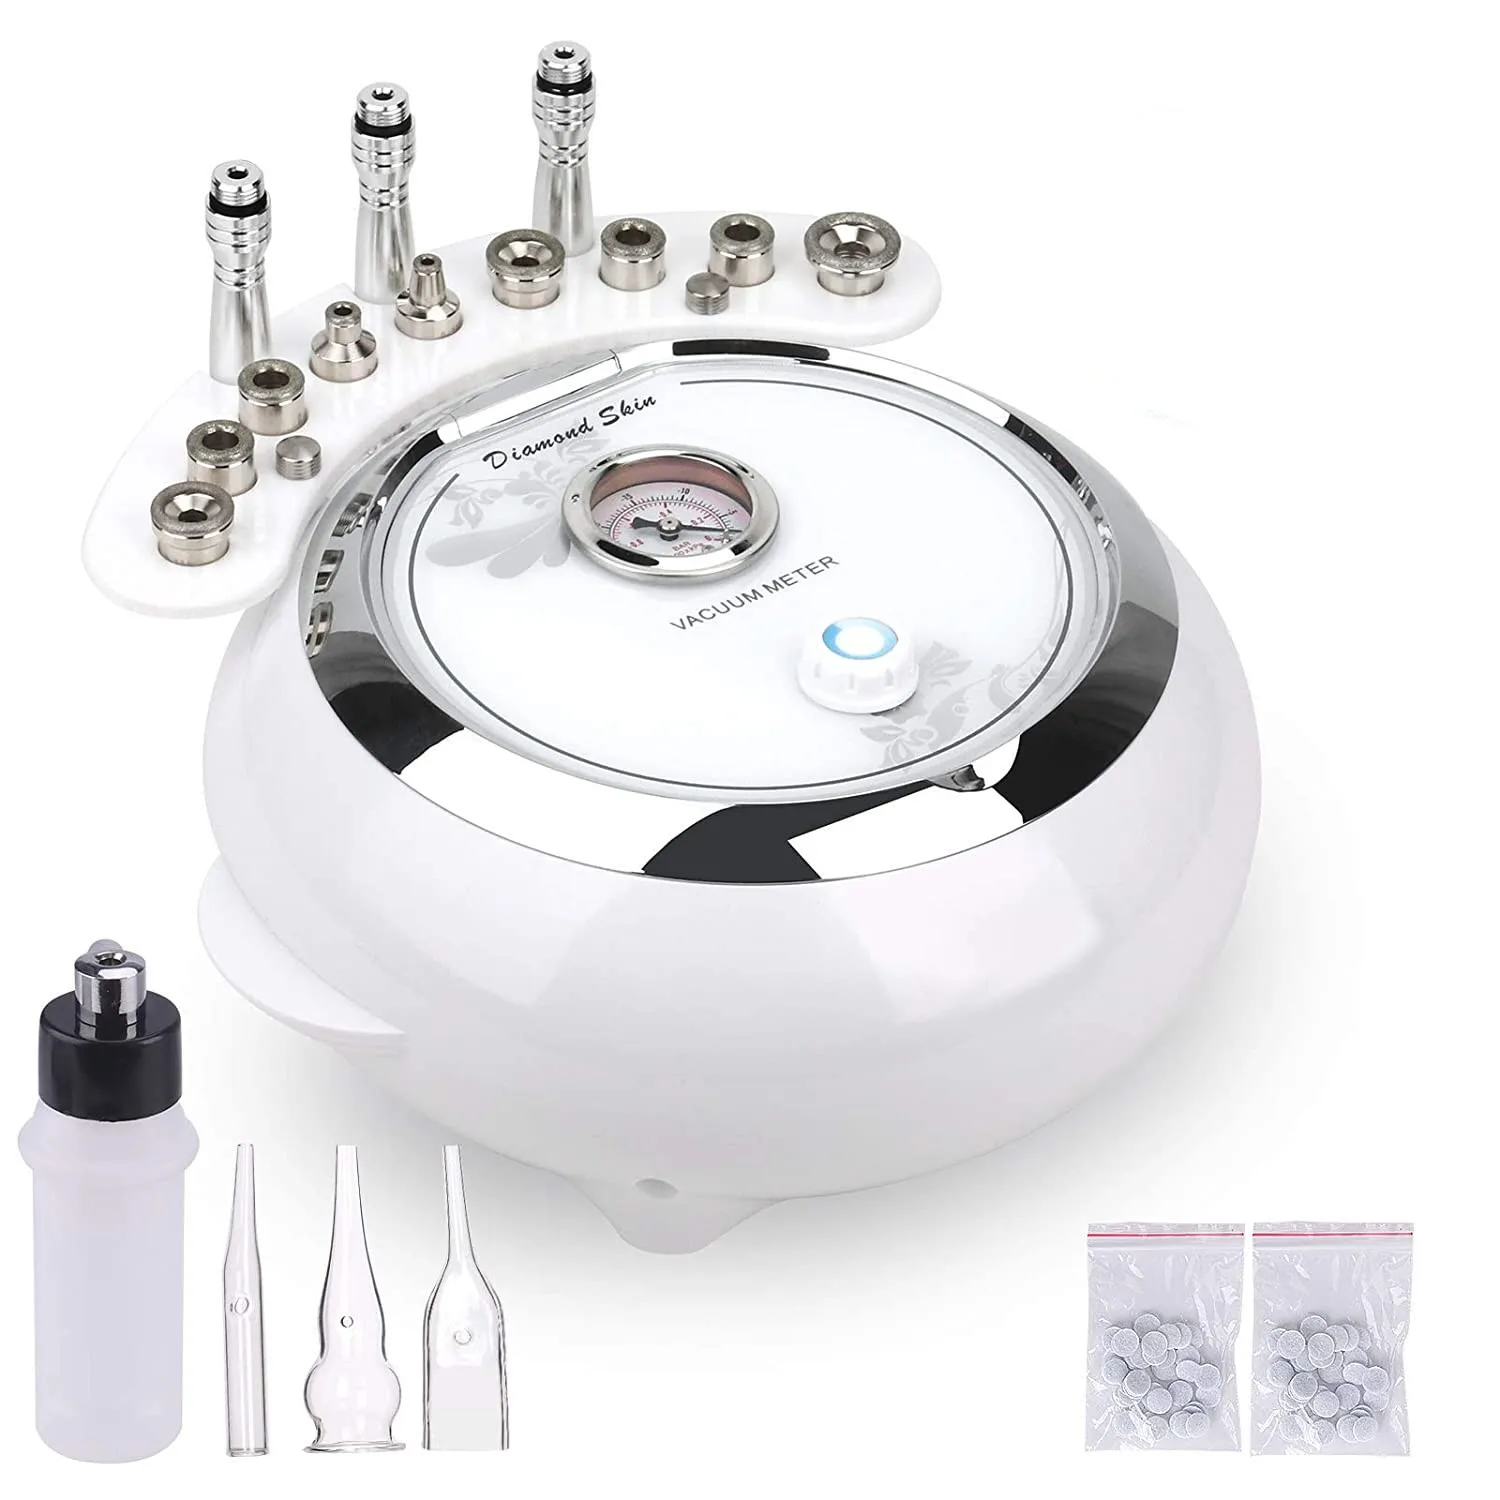 3 in 1 Diamond Microdermabrasion Machine Personal Home Use Beauty Salon Wrinkle Face Peeling Equipment